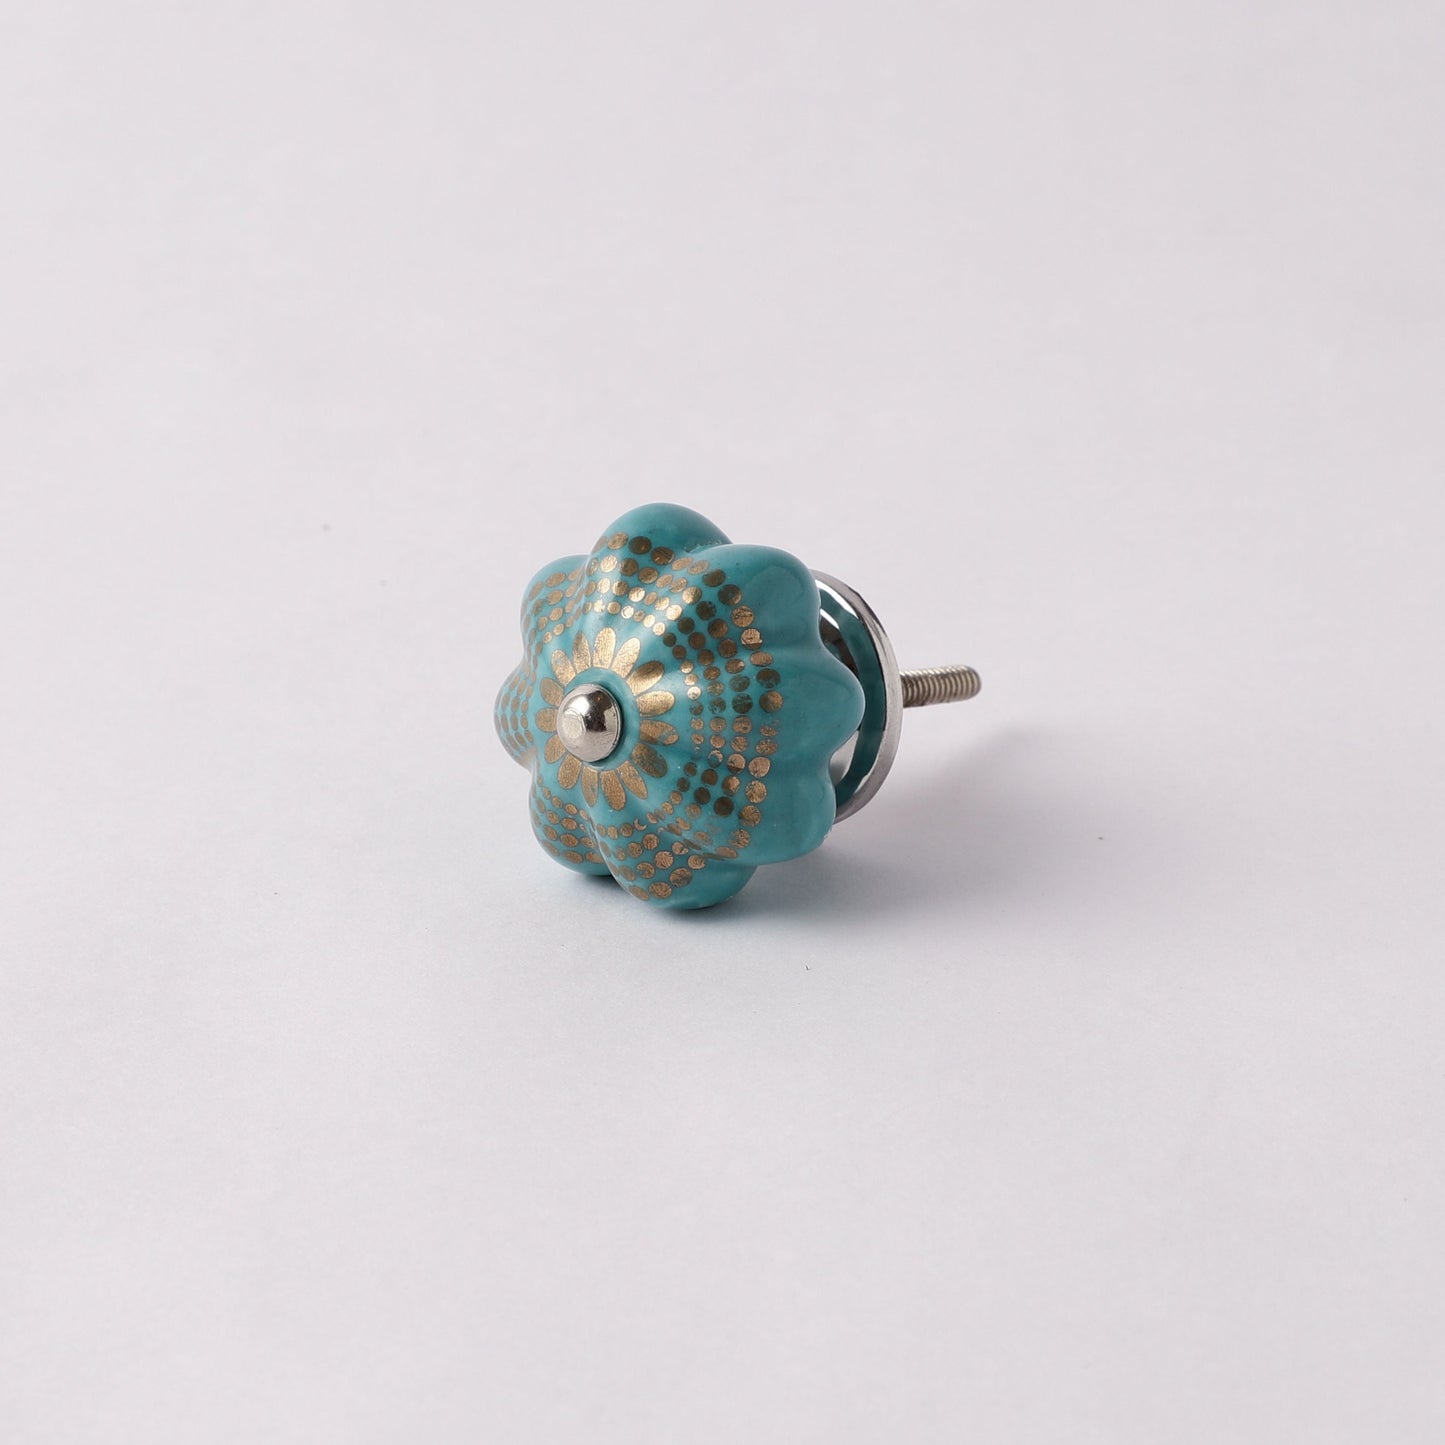 Classic Style Teal, White and Gold Ceramic Pull Knobs (C27)